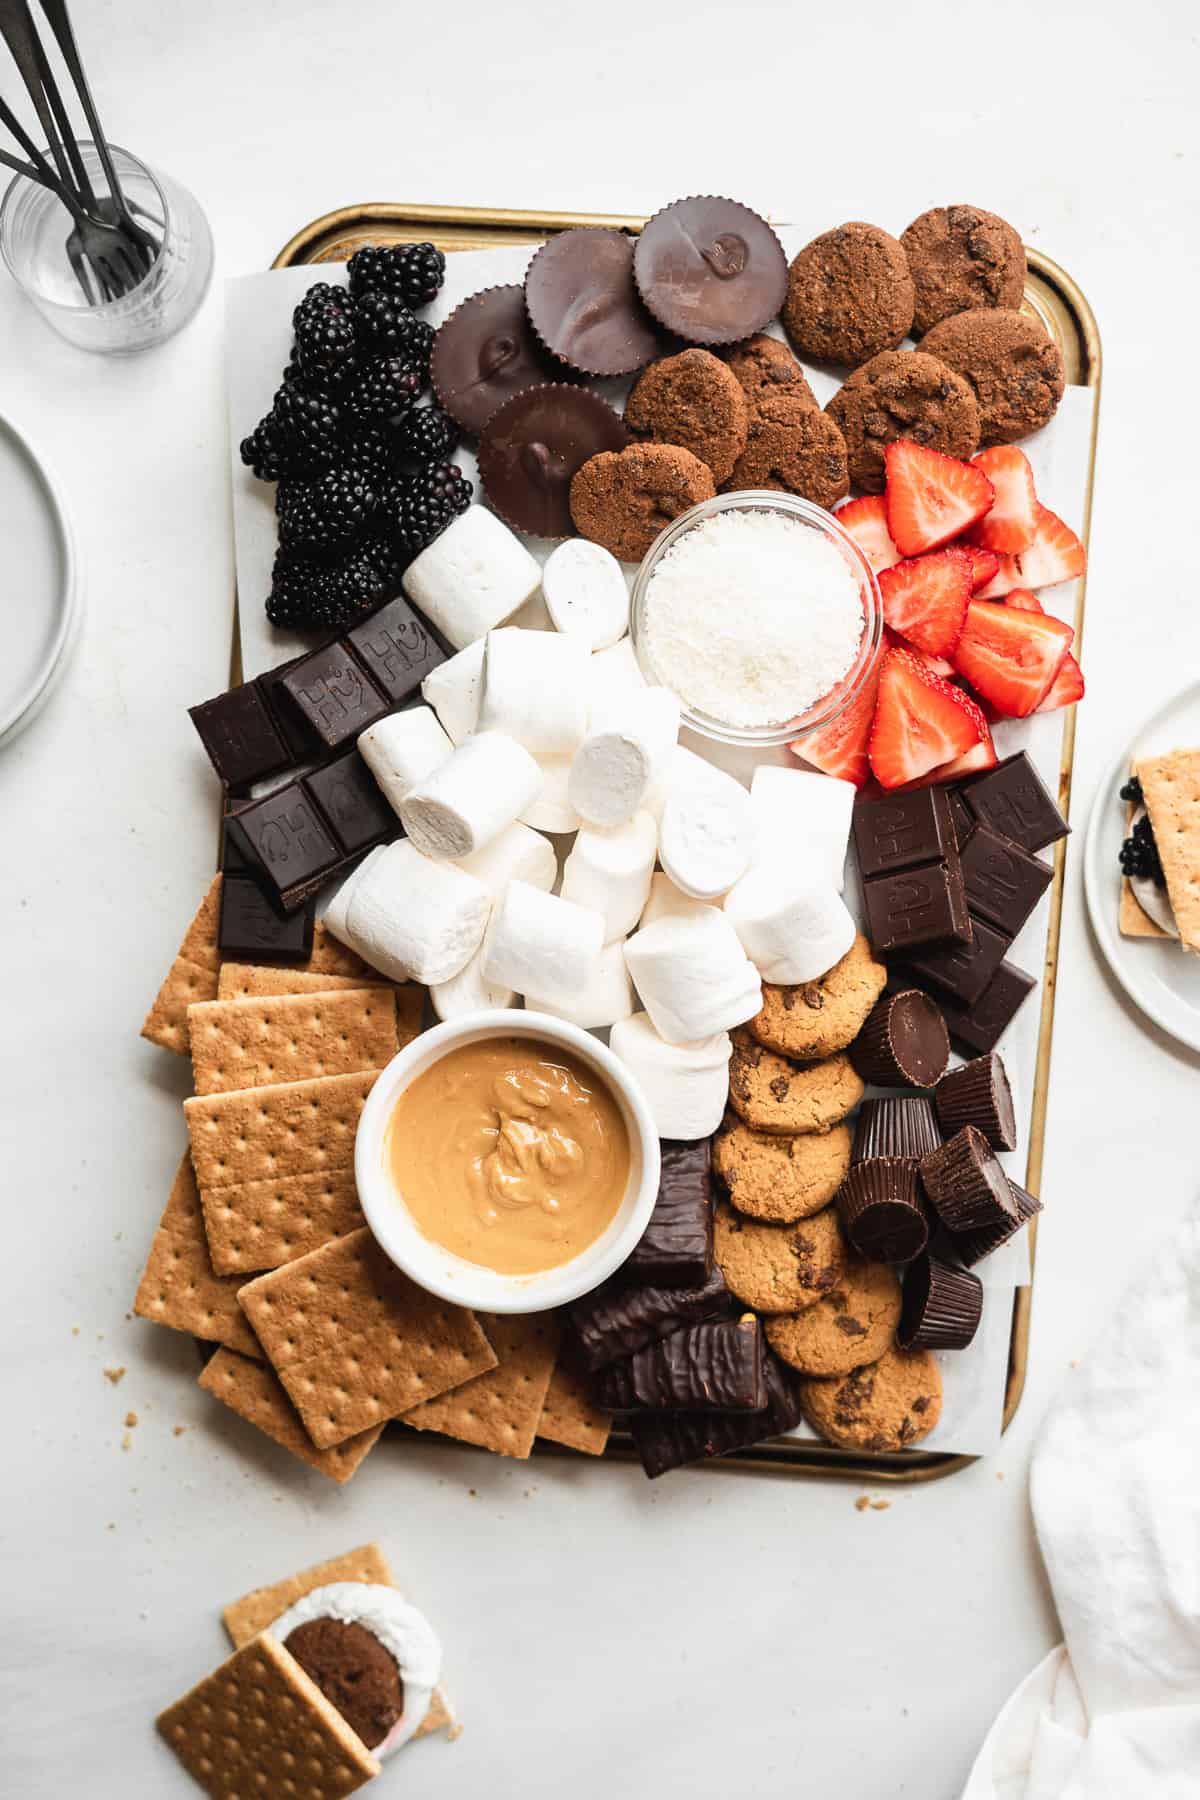 Platter with s'more toppings spread out on a white surface.